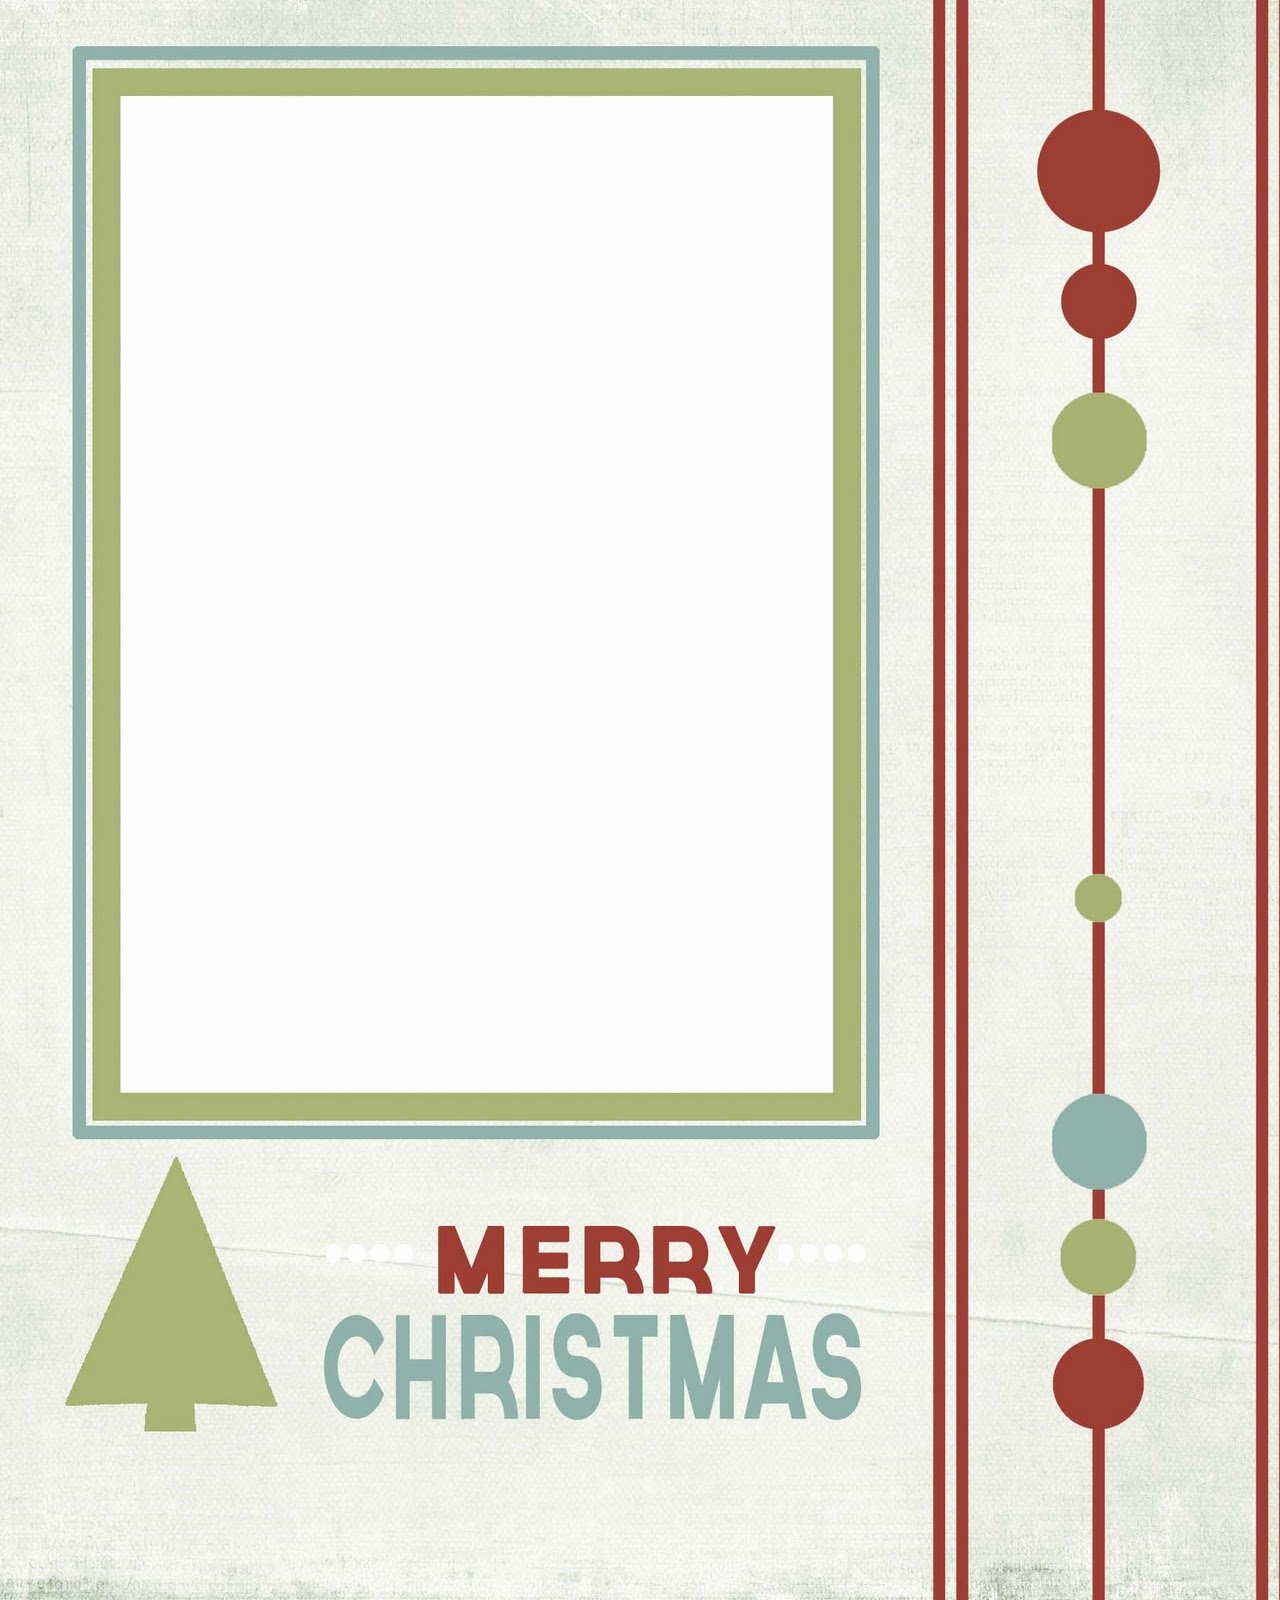 Lovely Little Snippets Christmas Card Display and 5 Free